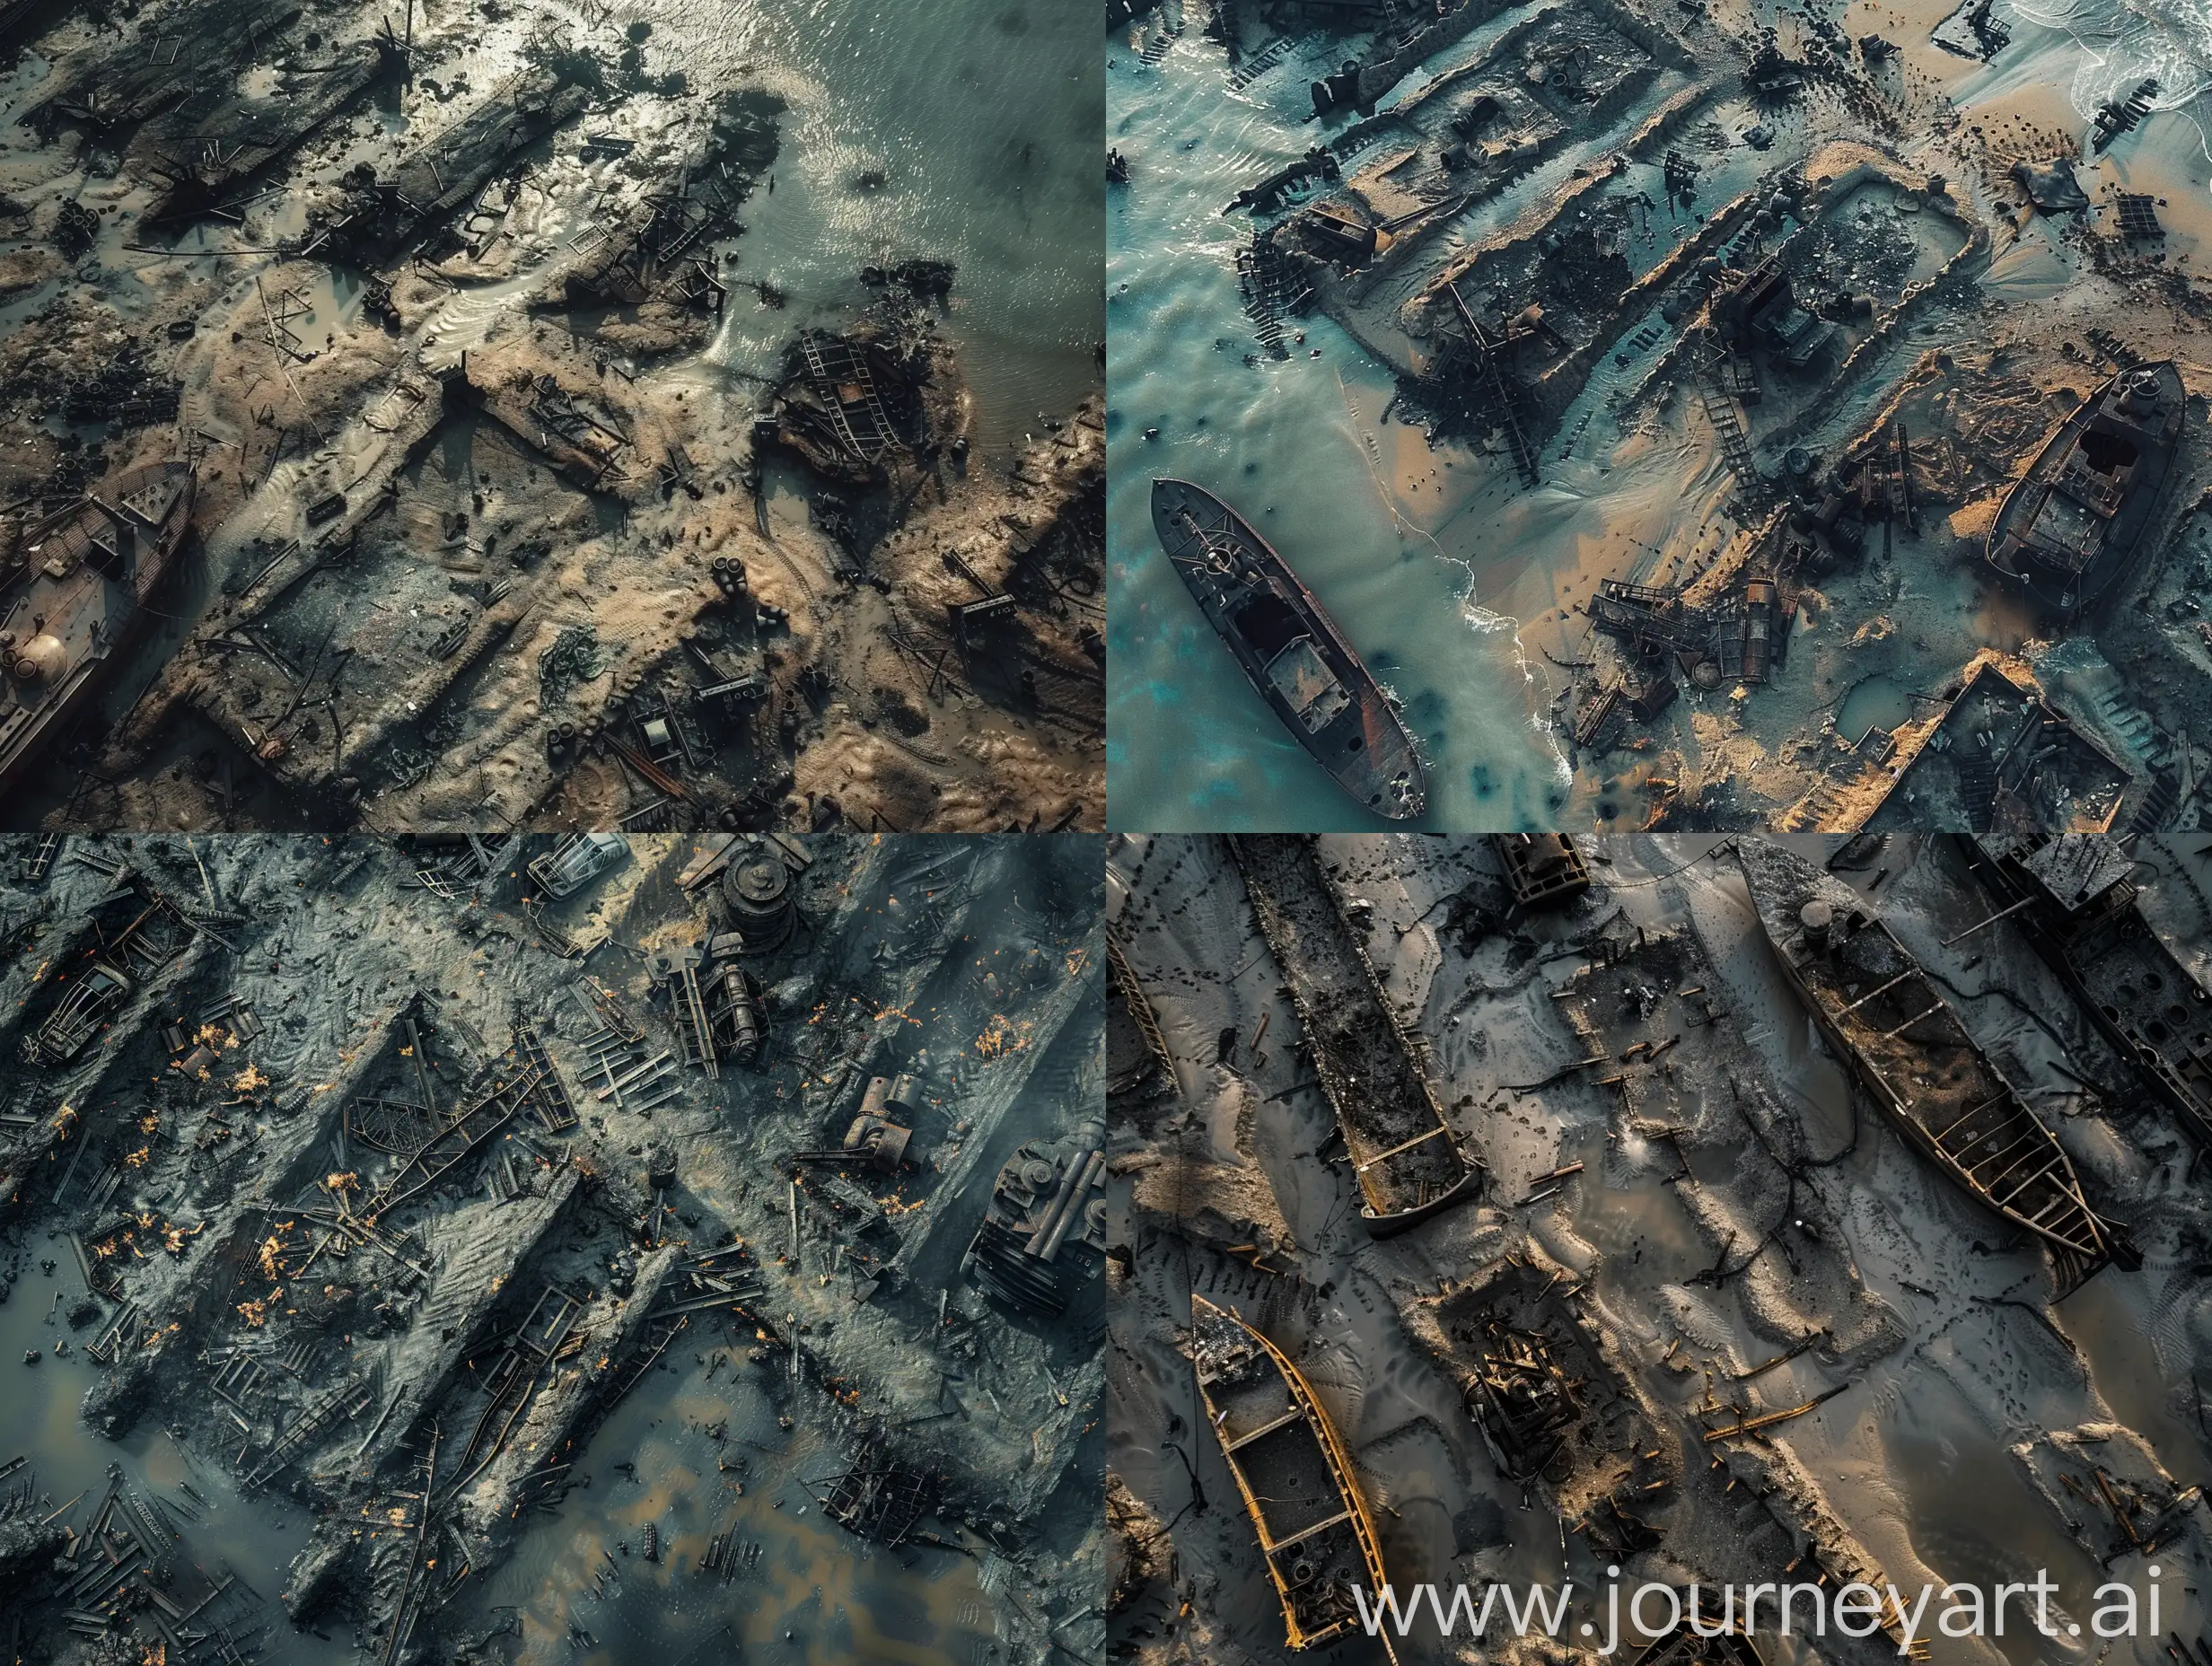 A bird's-eye view of the landing after the battle. A lot of trenches and burned equipment. But with no men